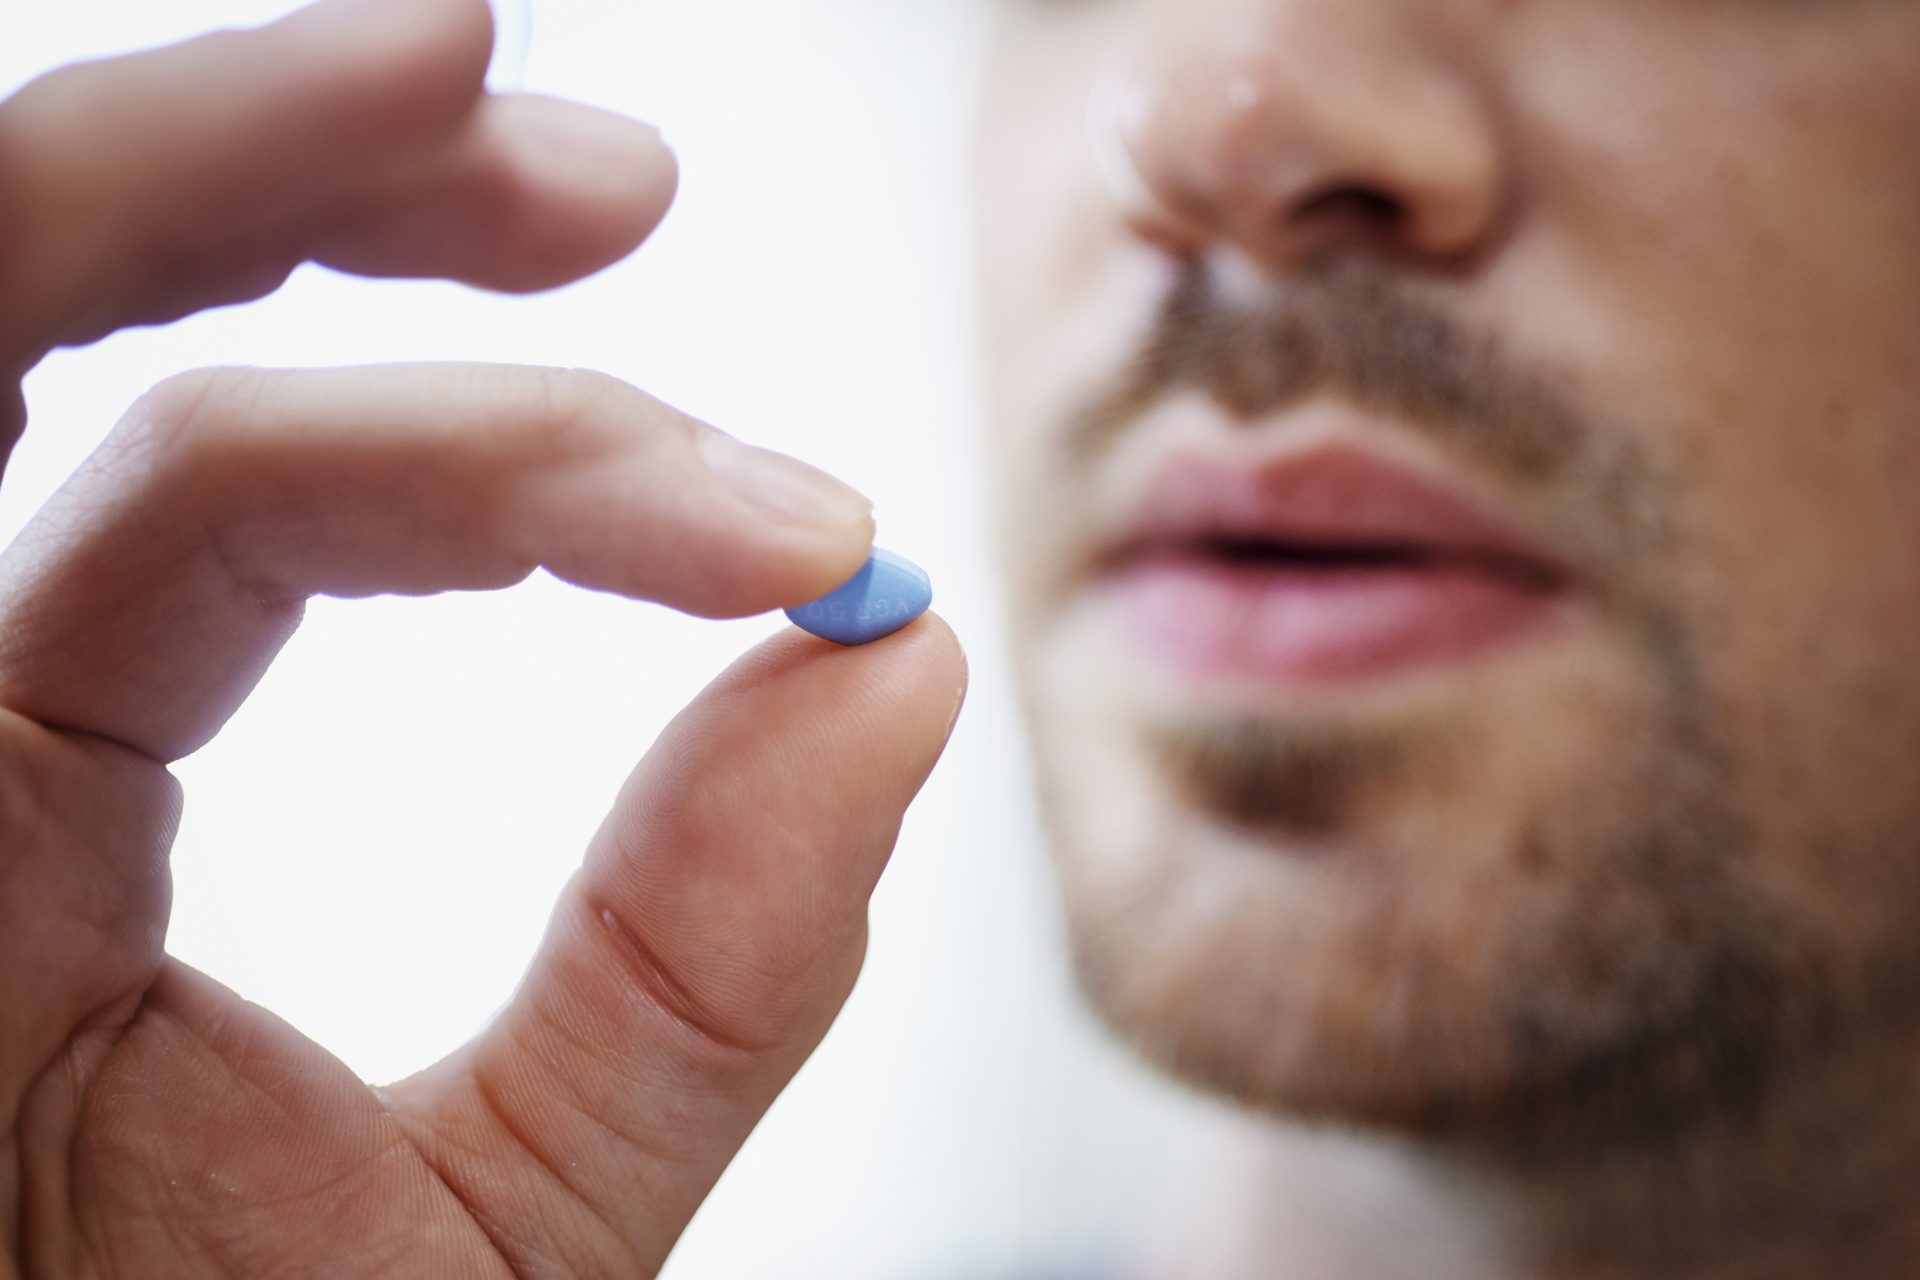 The pill that makes you giggle could save your life